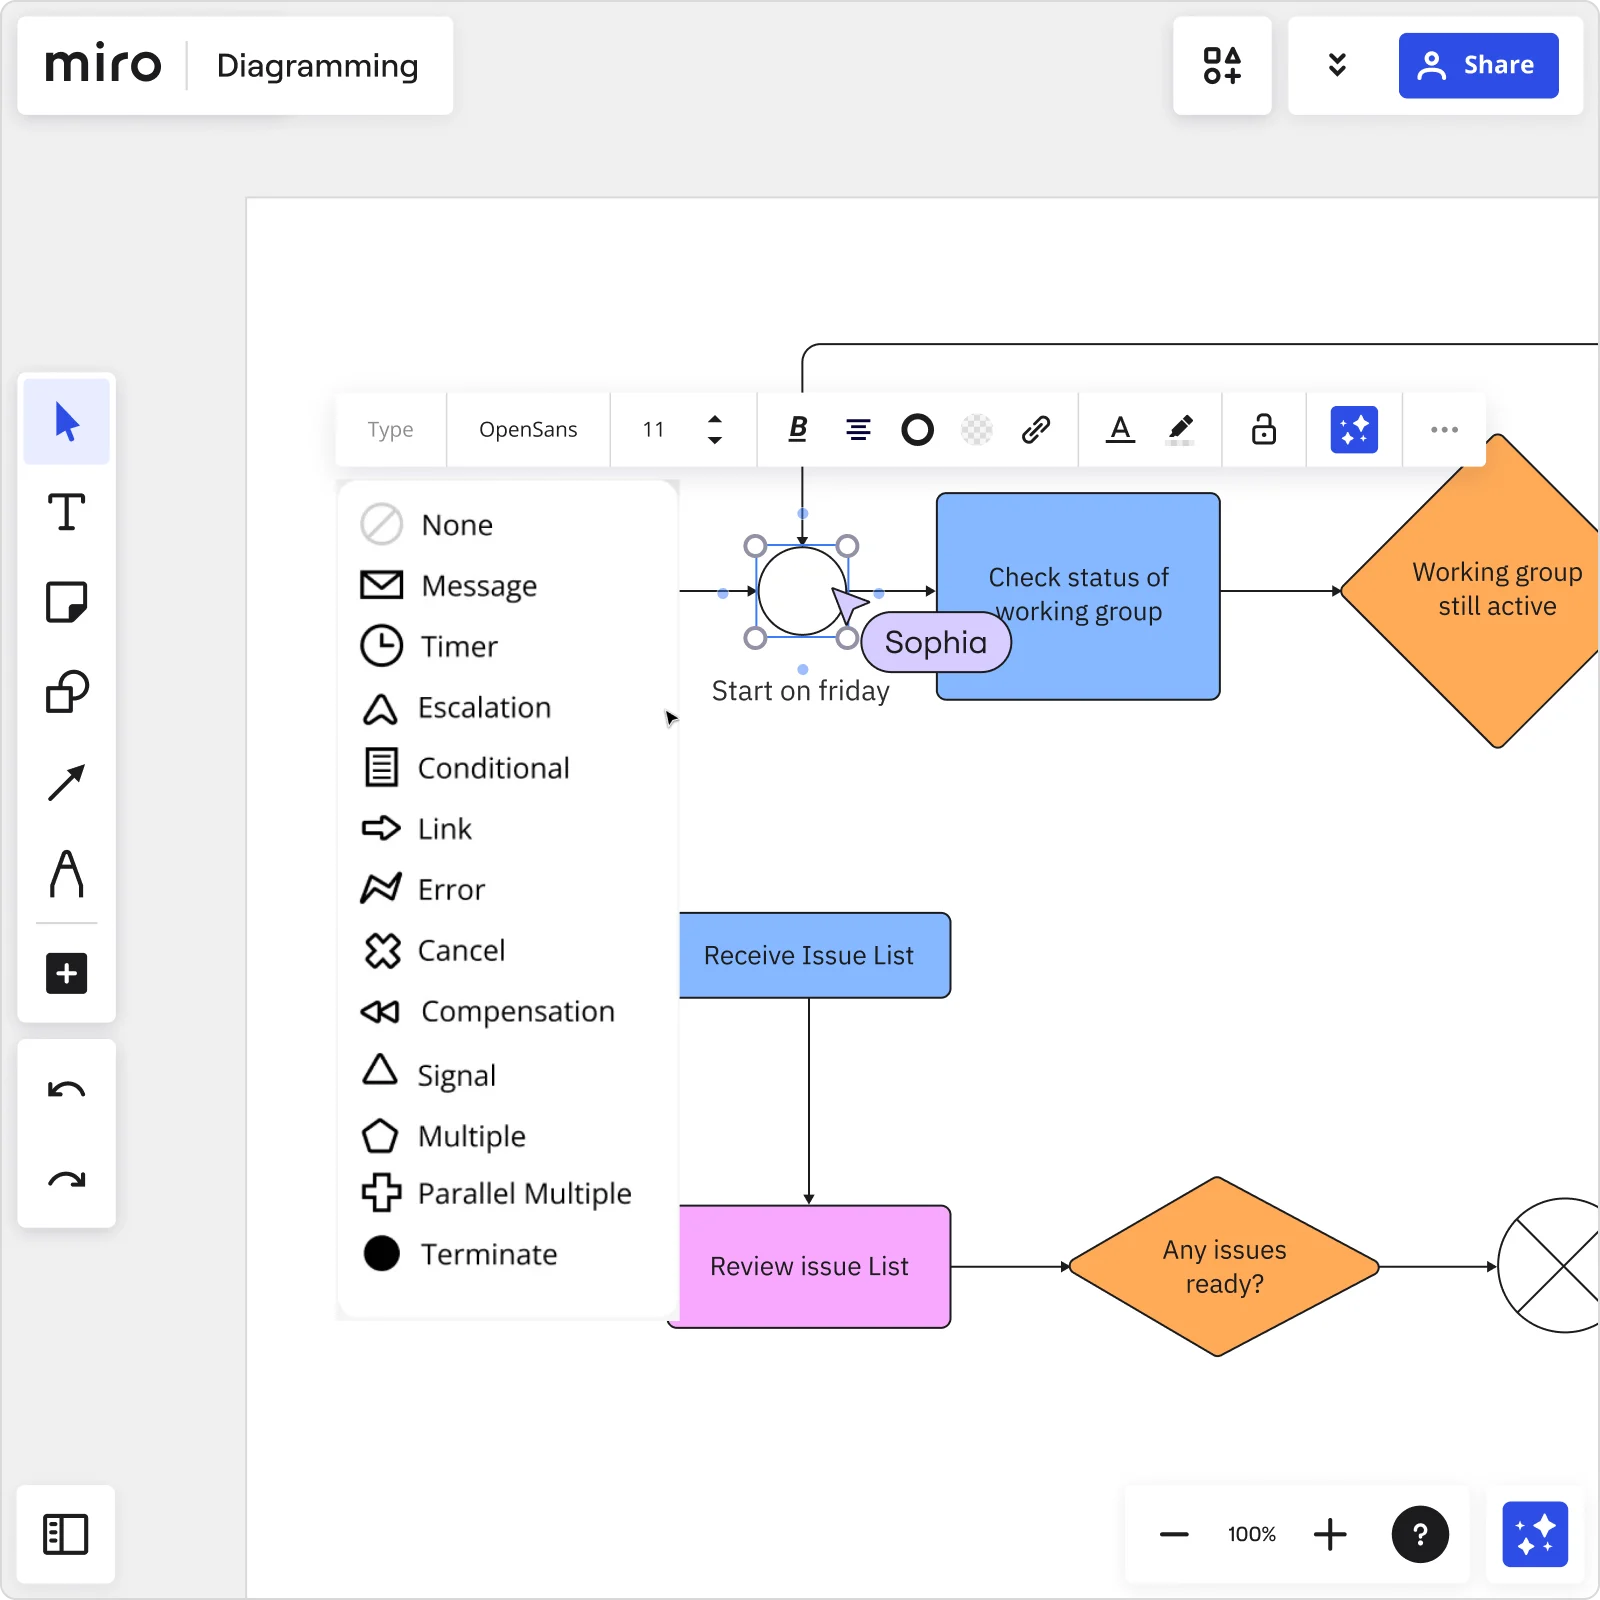 An image showing how to create a BPMN diagram online using Miro's tool